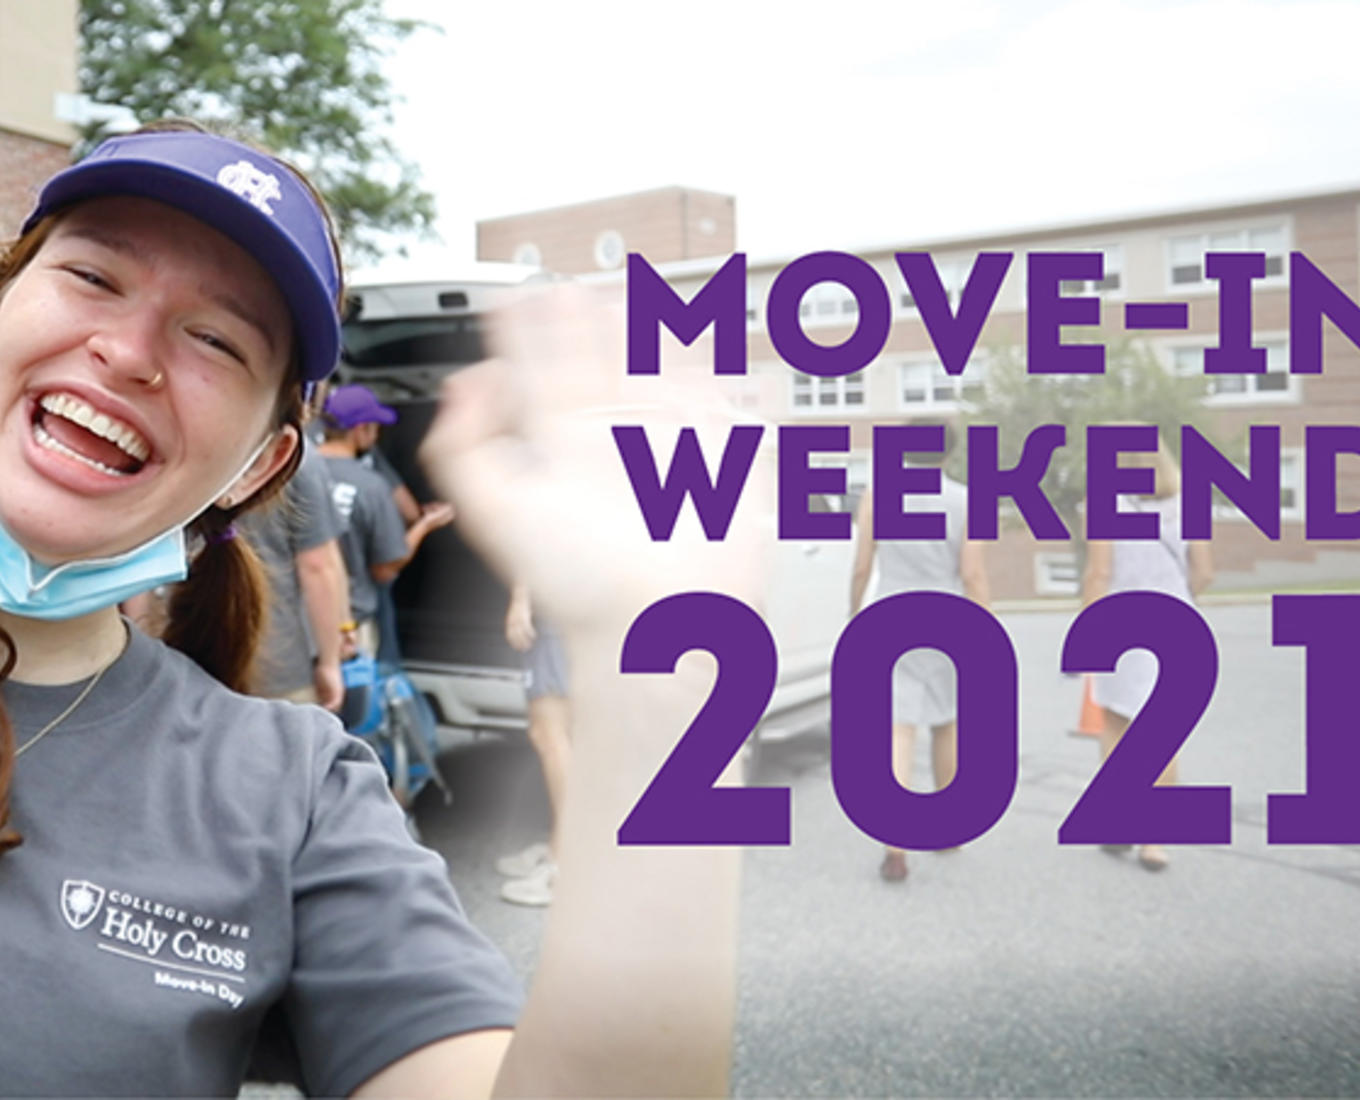 A girl waves next to the words "Move-In Weekend 2021"